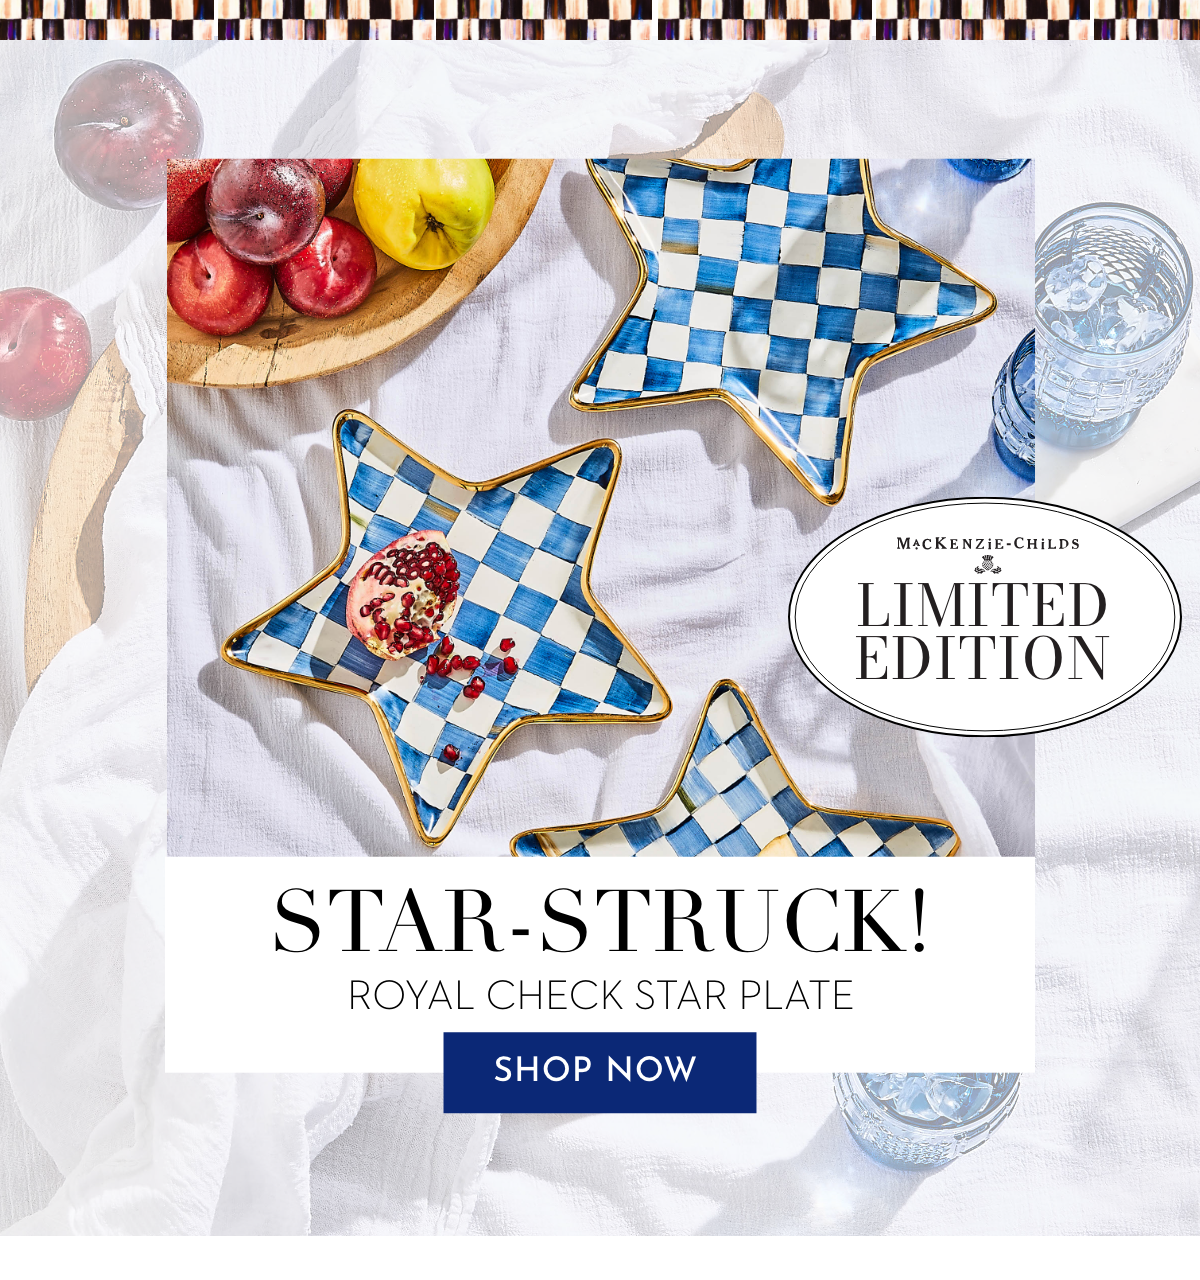 STAR-STRUCK! ROYAL CHECK STAR PLATE | SHOP NOW